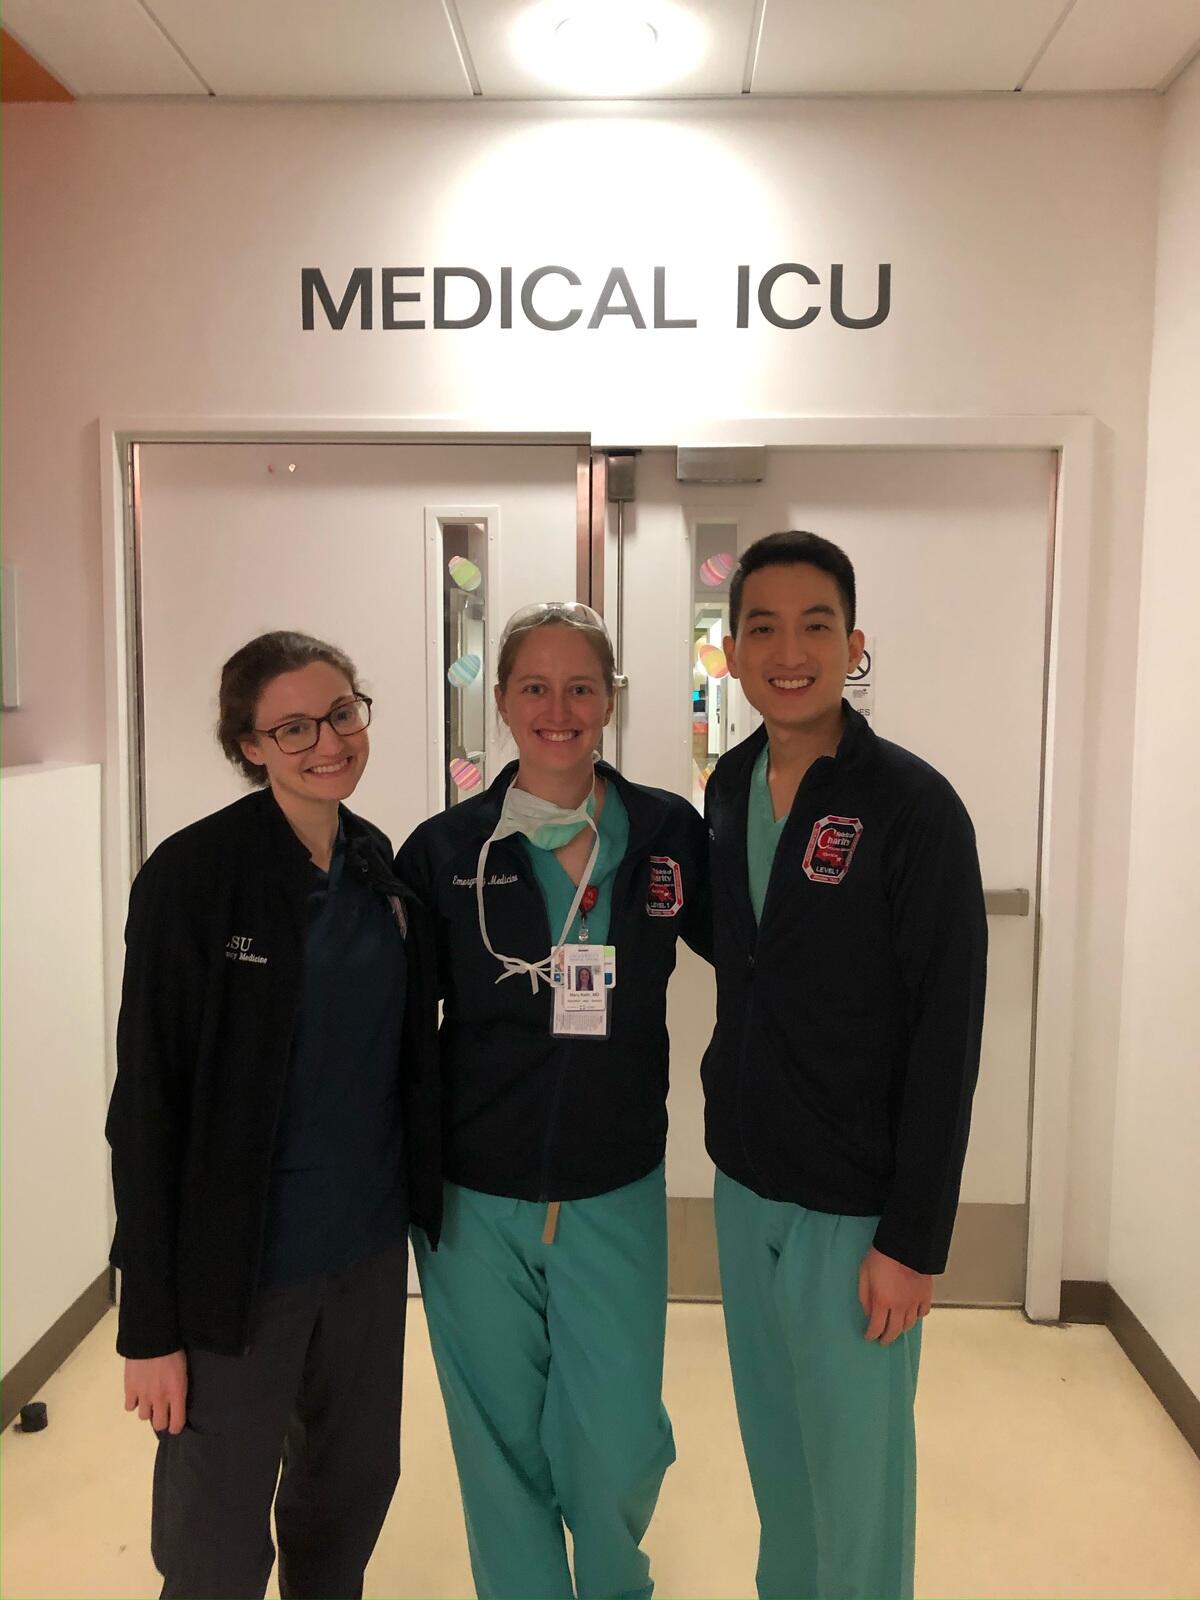 Mary Katherine Keith, M.D., (middle) with Meredith Tremblay, M.D., and Andrew Wong, M.D.